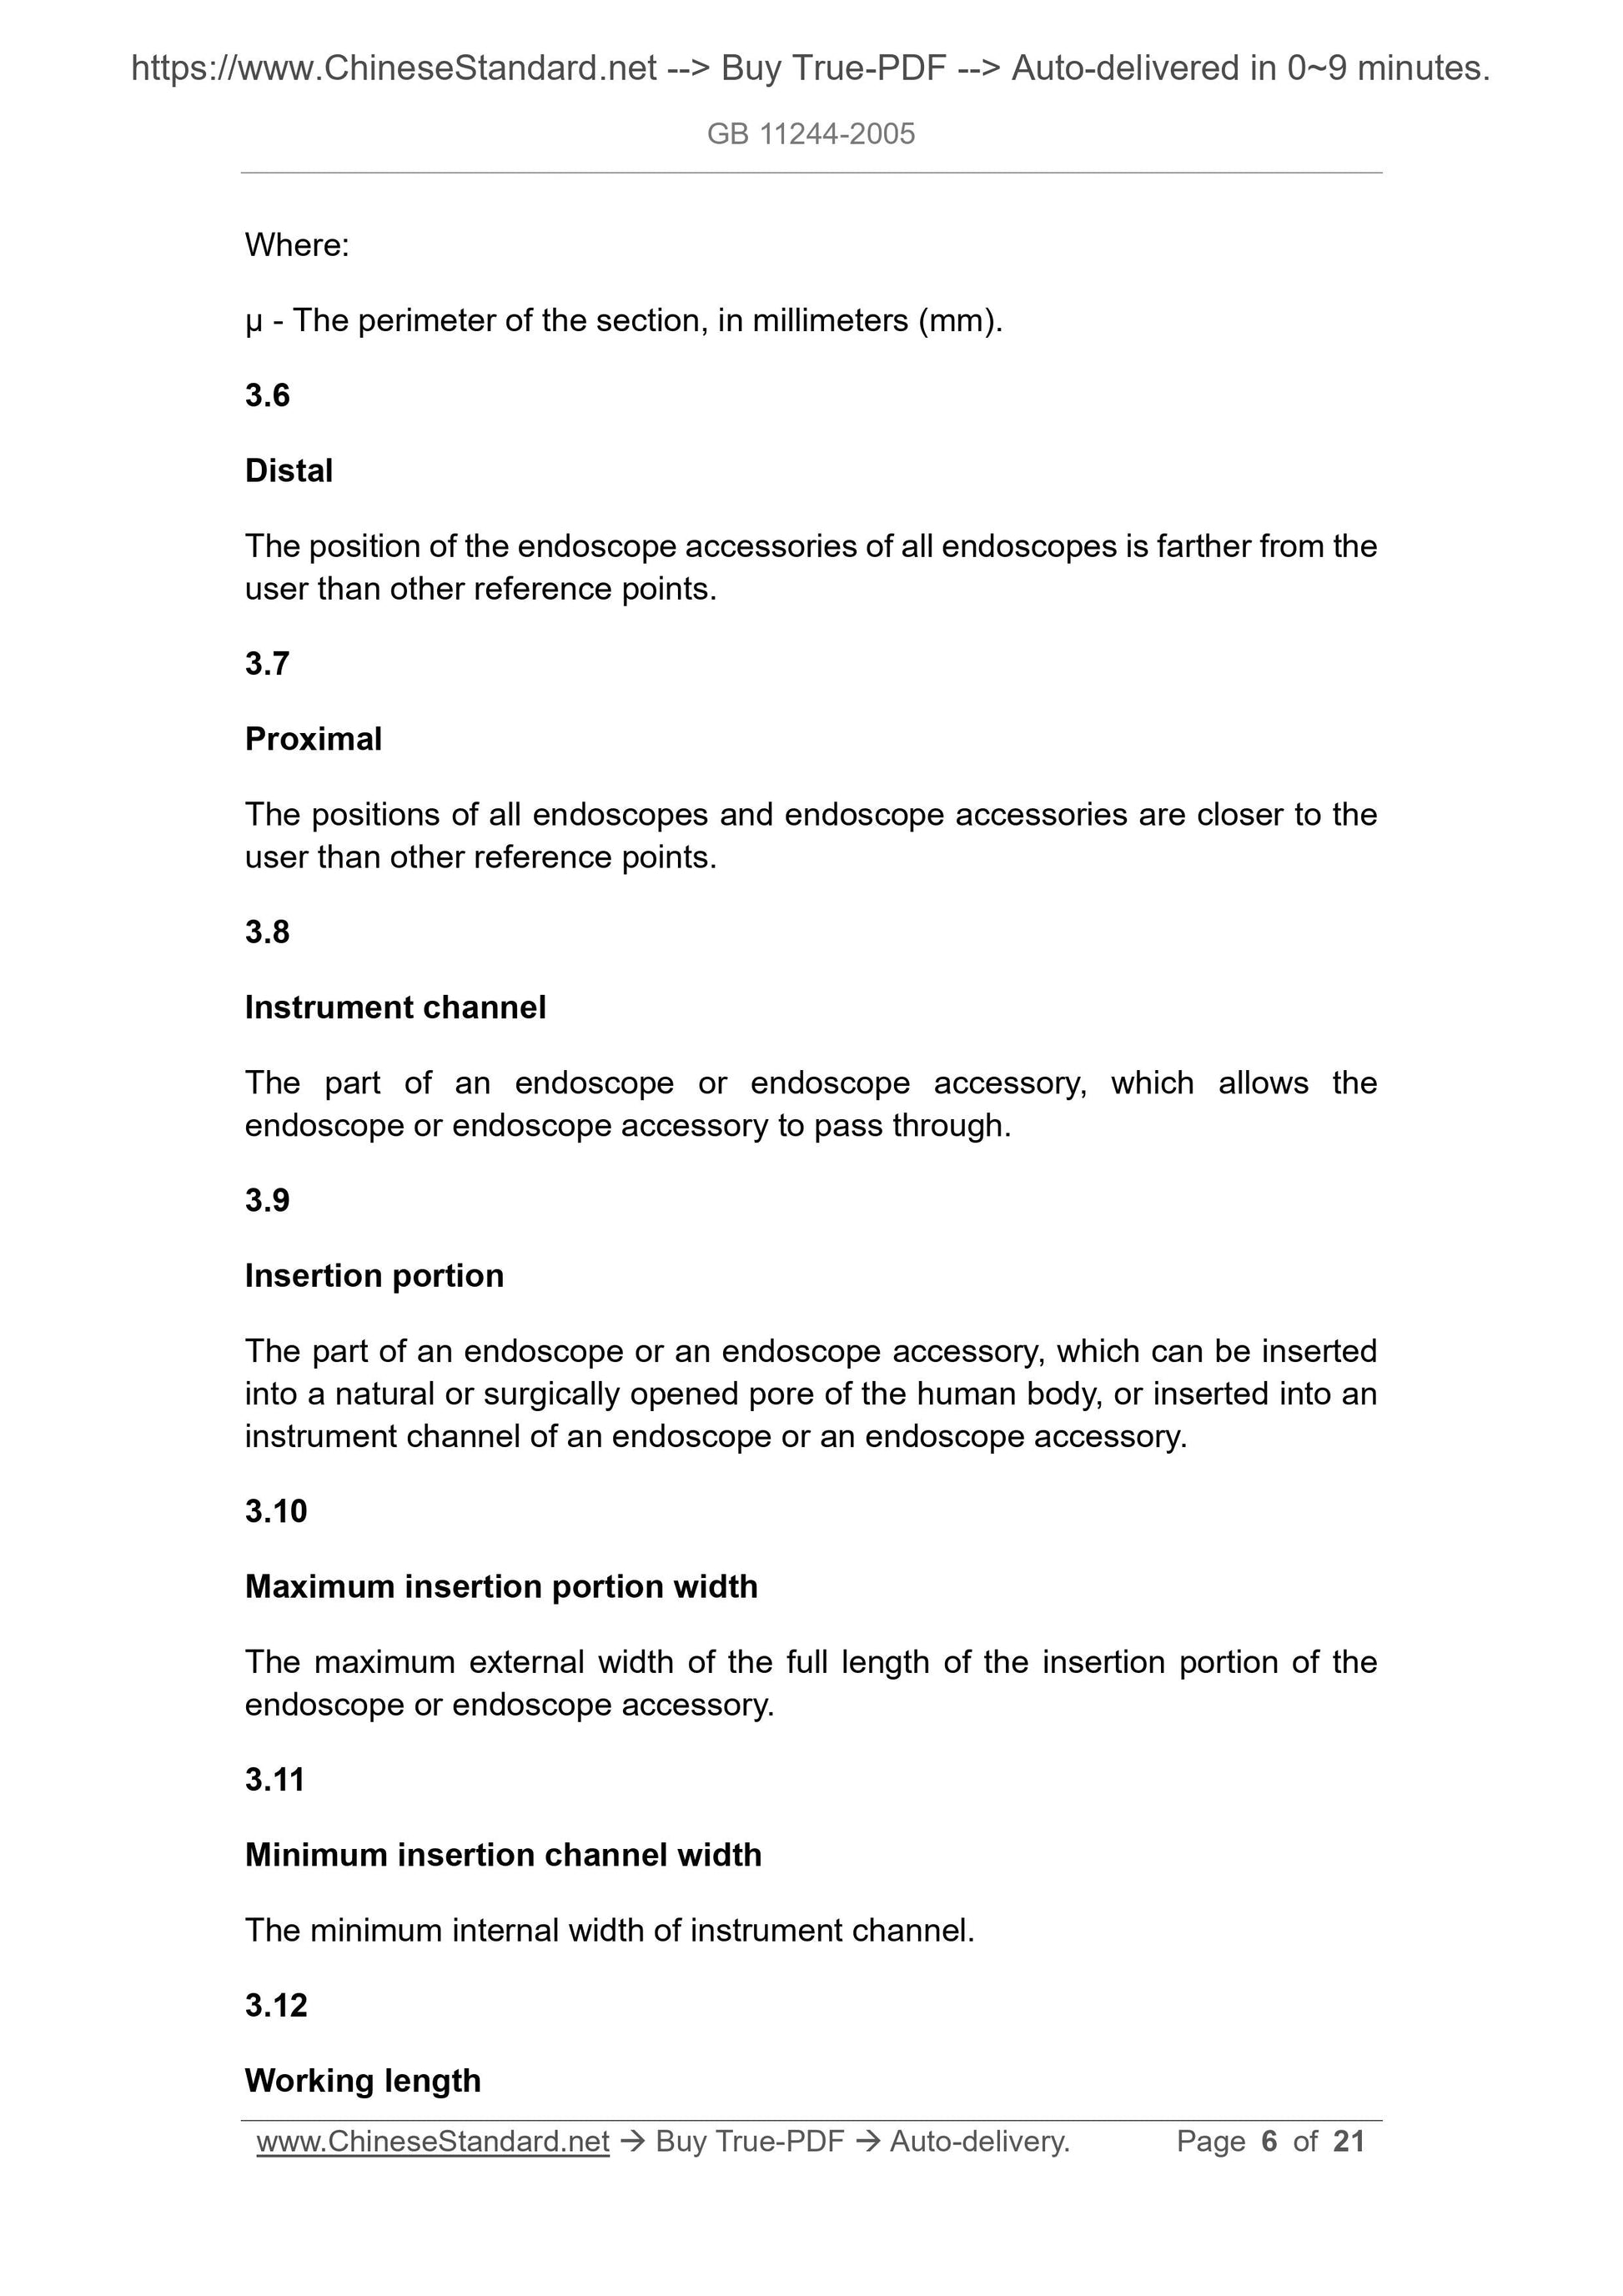 GB 11244-2005 Page 4